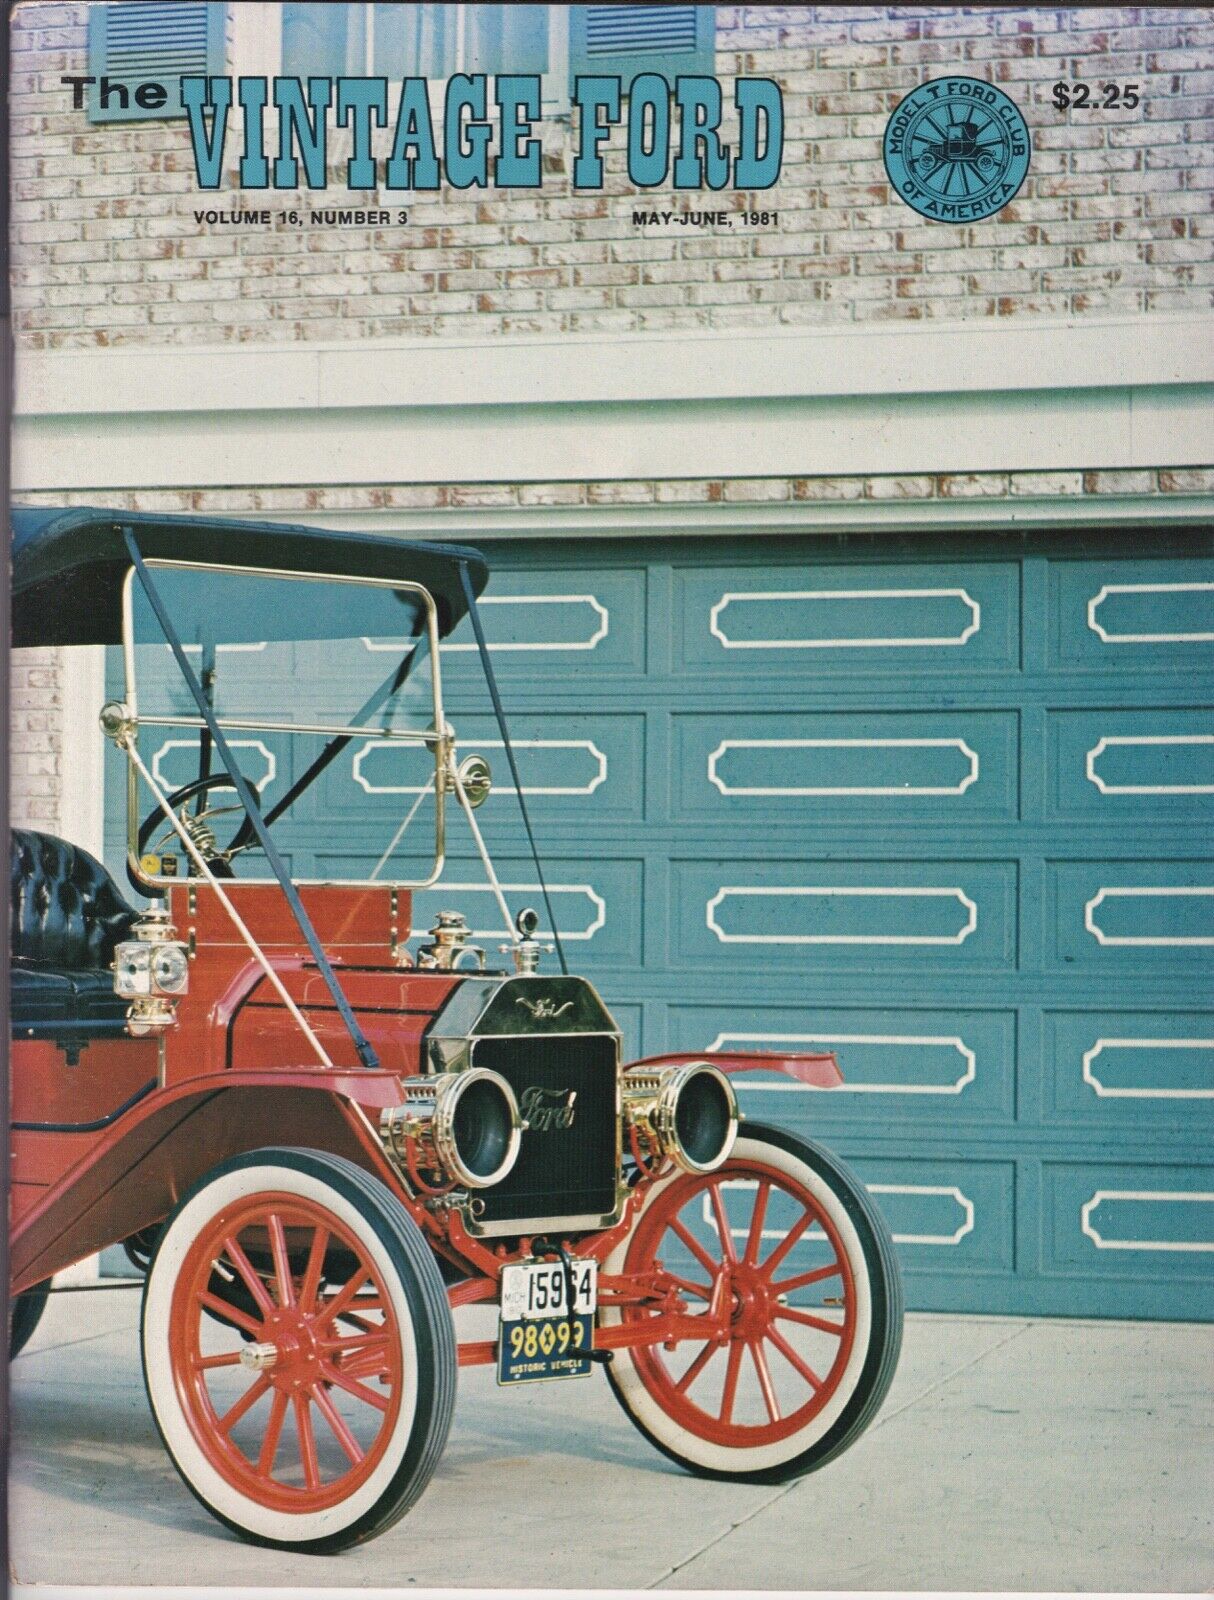 1910 FORD TOURING - THE VINTAGE FORD 1981 MAGAZINE RALPH'S GARAGE, DEARBORN USA